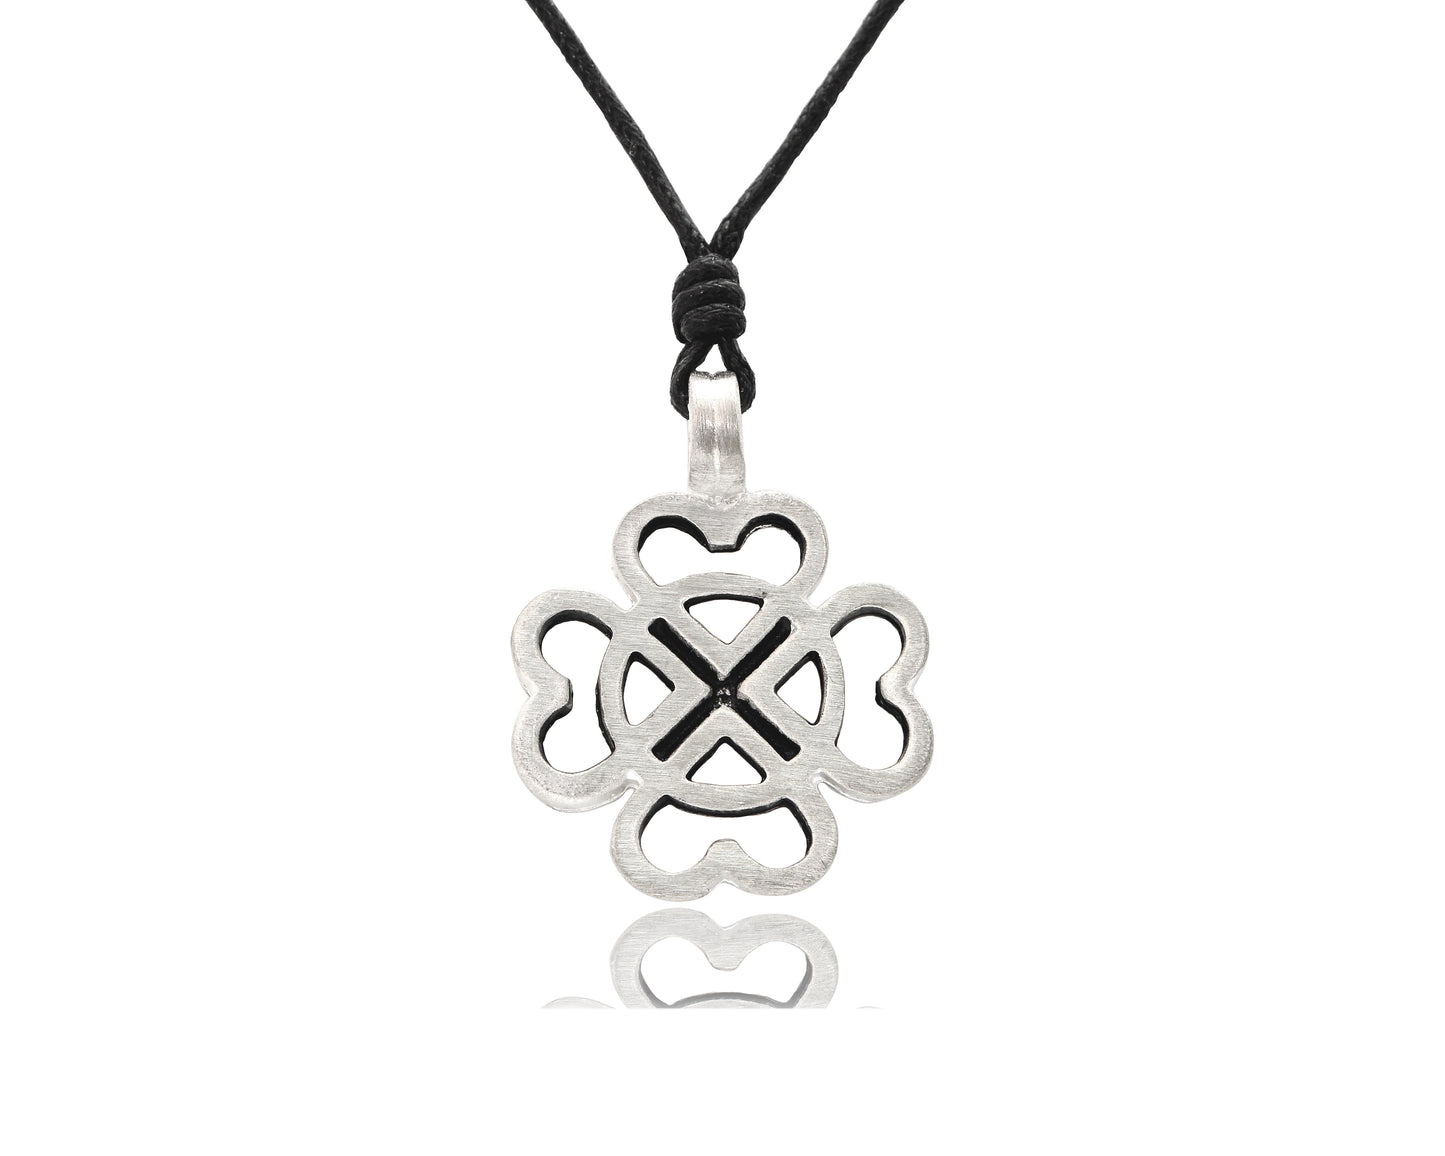 Clover Silver Pewter Charm Necklace Pendant Jewelry